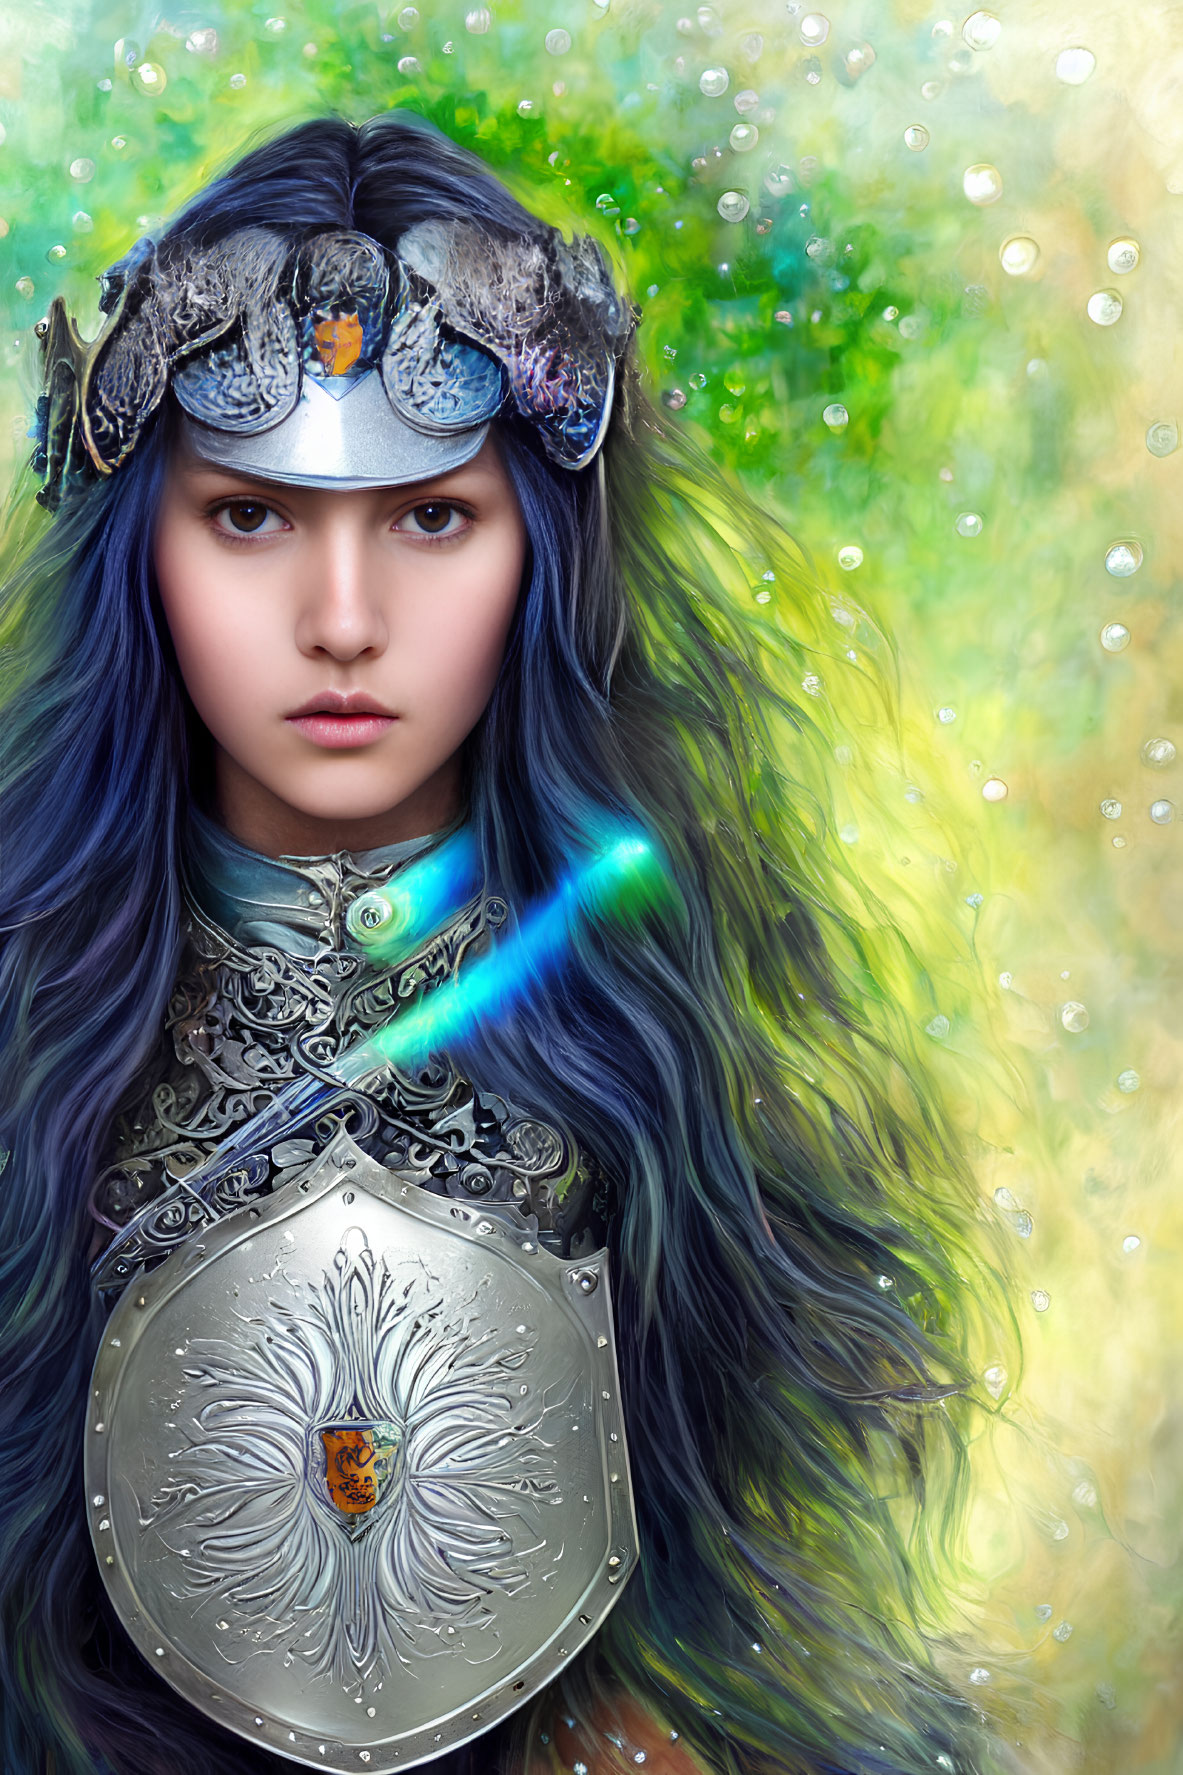 Young woman in blue hair and ornate armor with shield and winged helmet in digital illustration